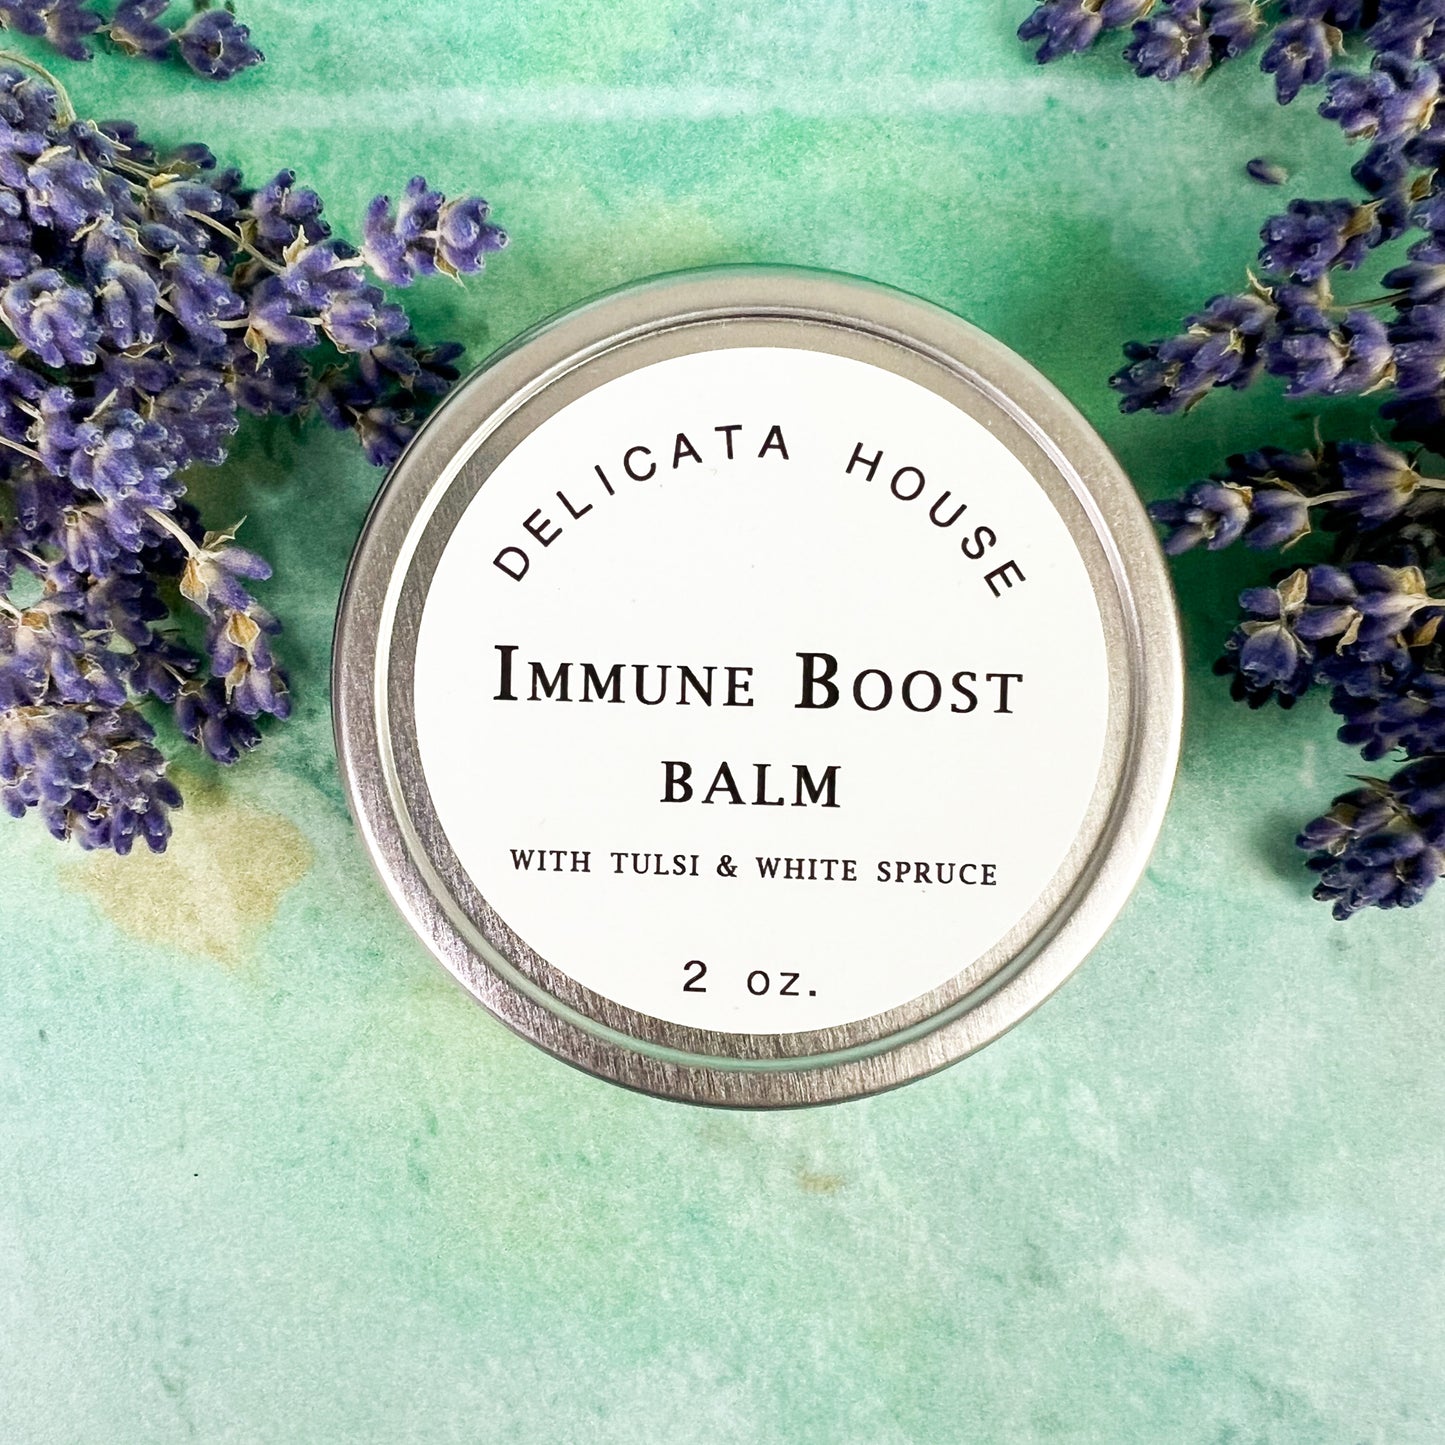 Balm / Immune Boost Balm with Tulsi and White Spruce / Aromatherapy Immune Support Balm / Wellness Balm / Herbal Immune Support Balm